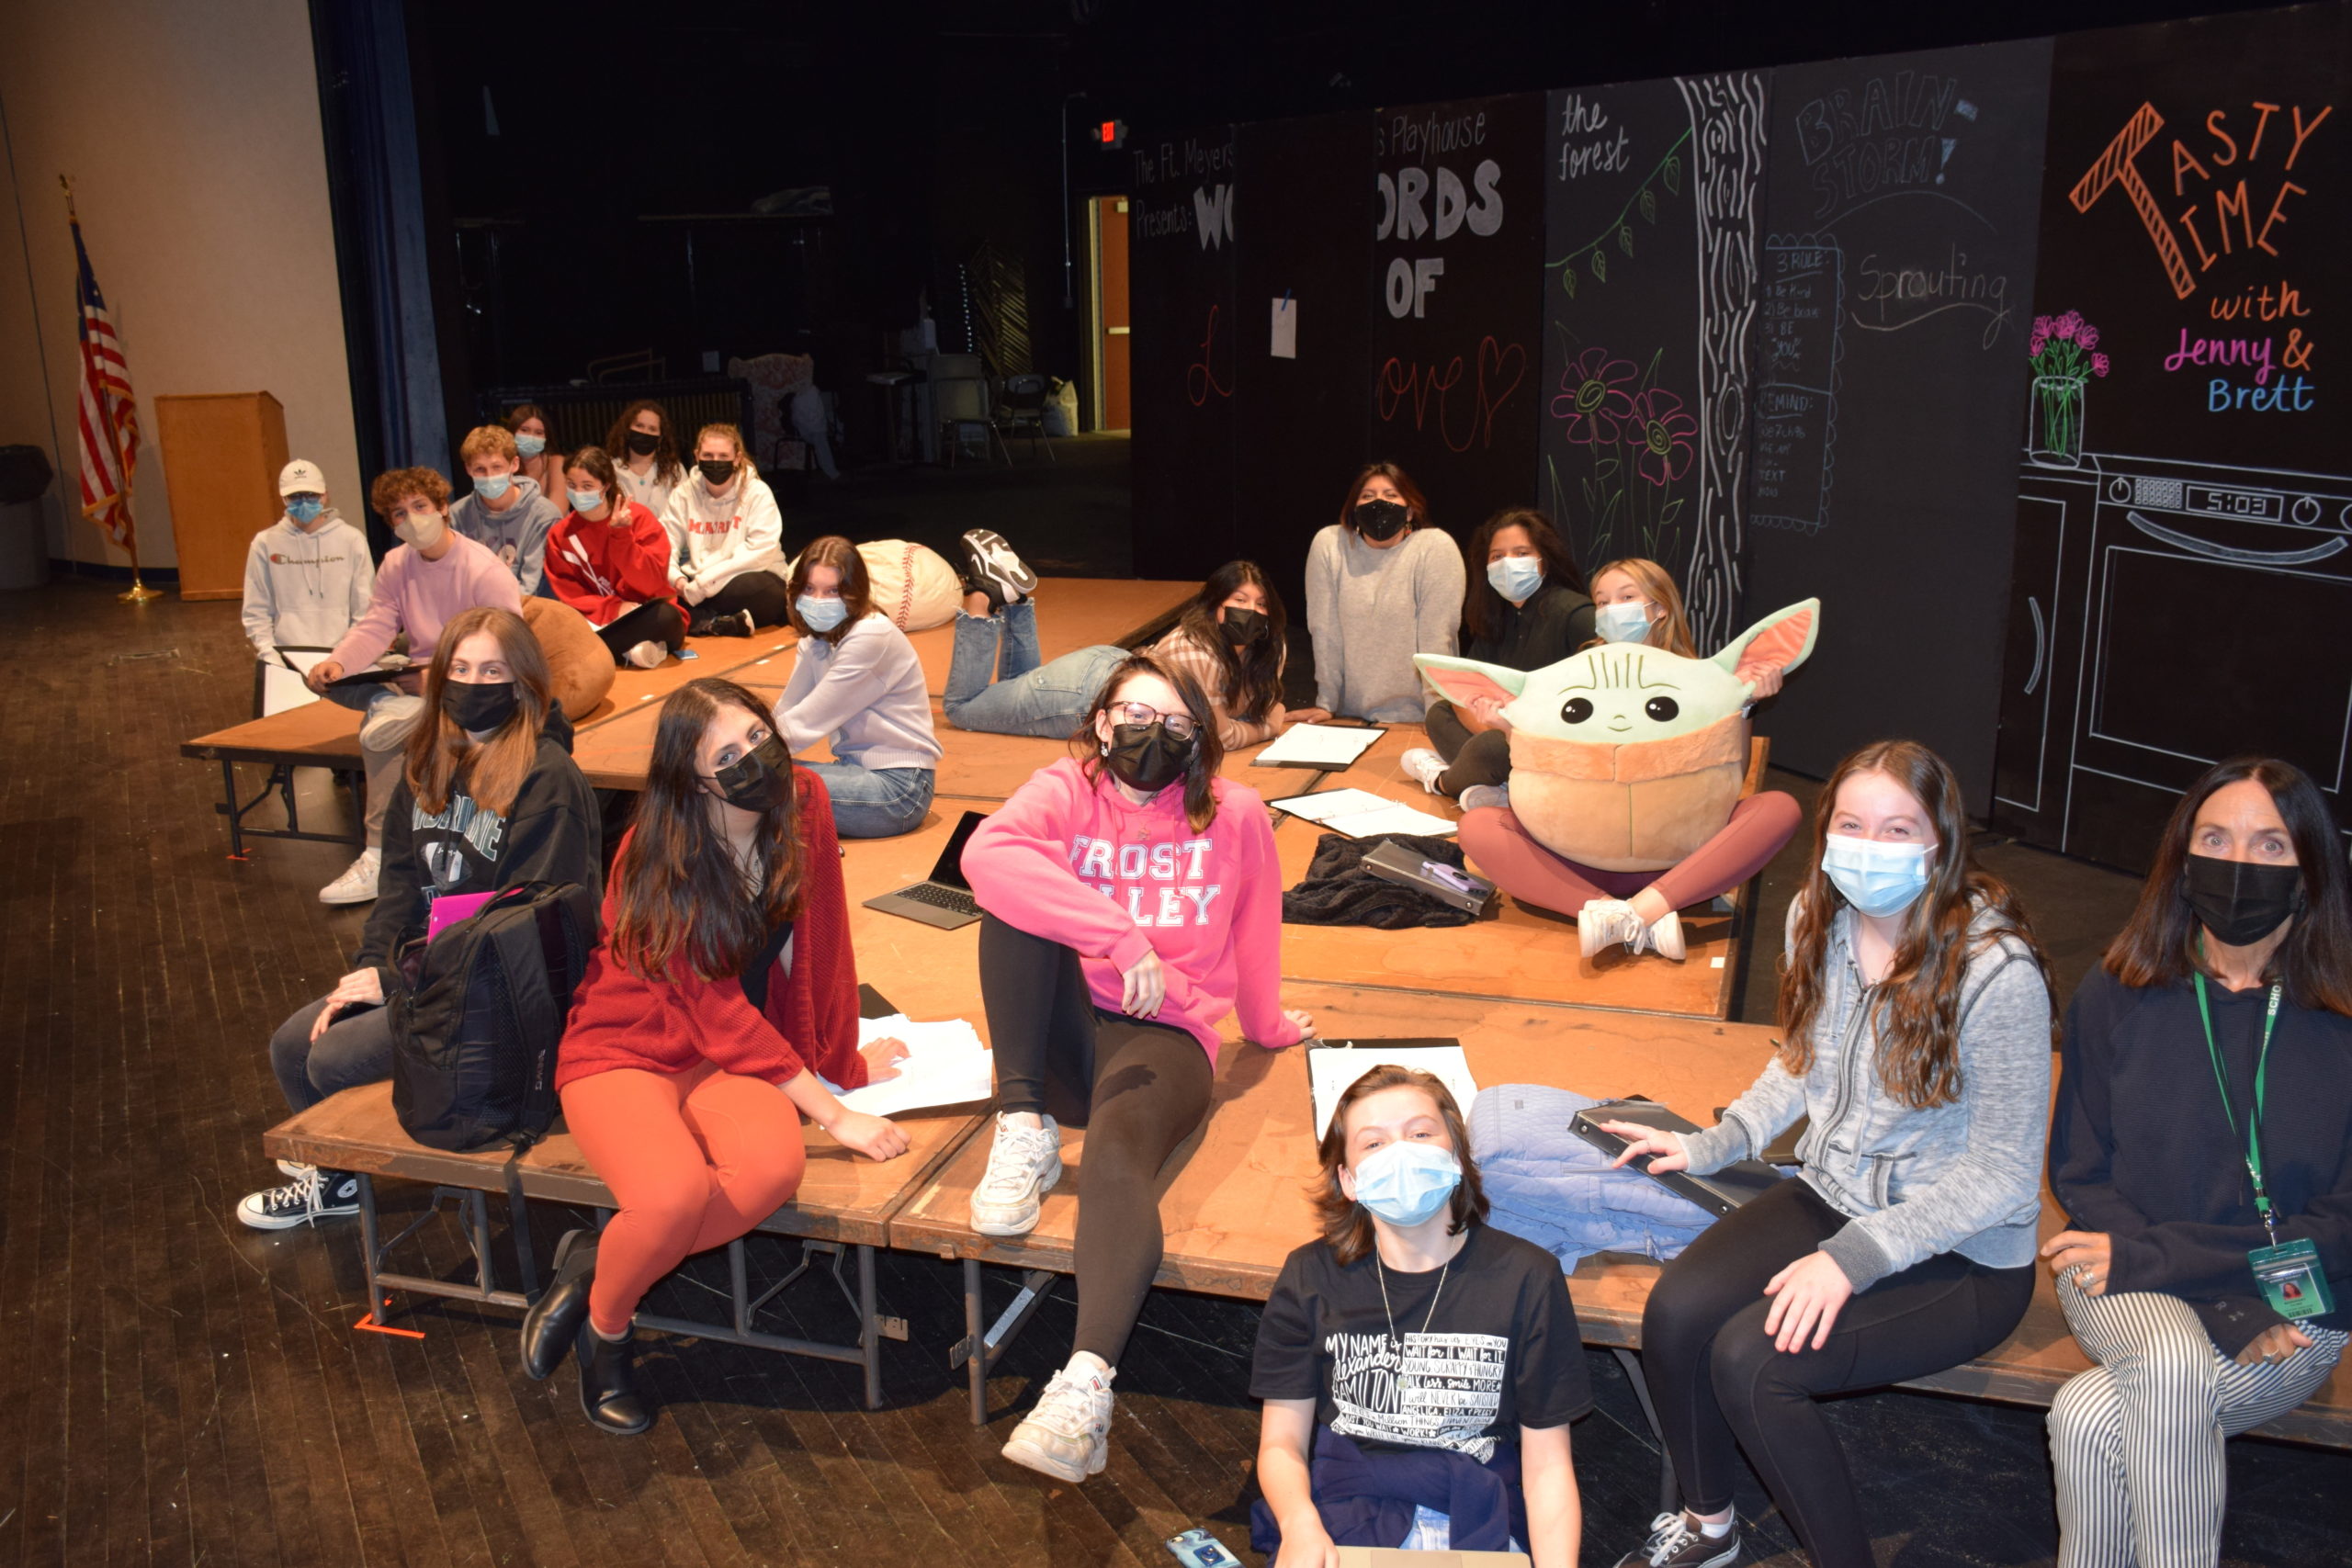 Westhampton Beach High School thespians are set to present “Brainstorm,” a production they wrote themselves, on the weekend of November 5.